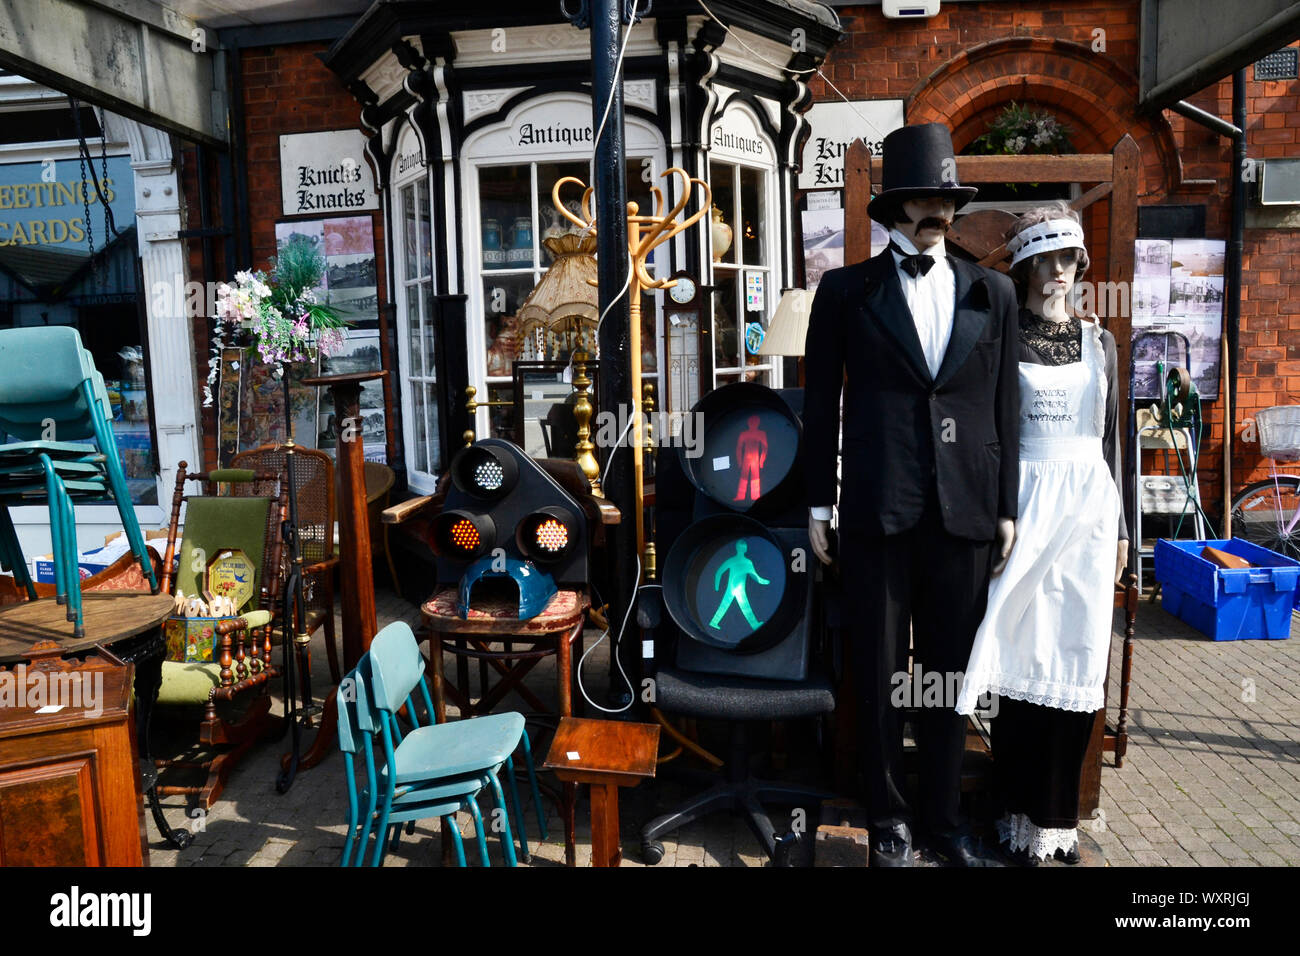 Knicks Knacks Antiques and Curiosities shop at Sutton on Sea, Lincolnshire, UK Stock Photo